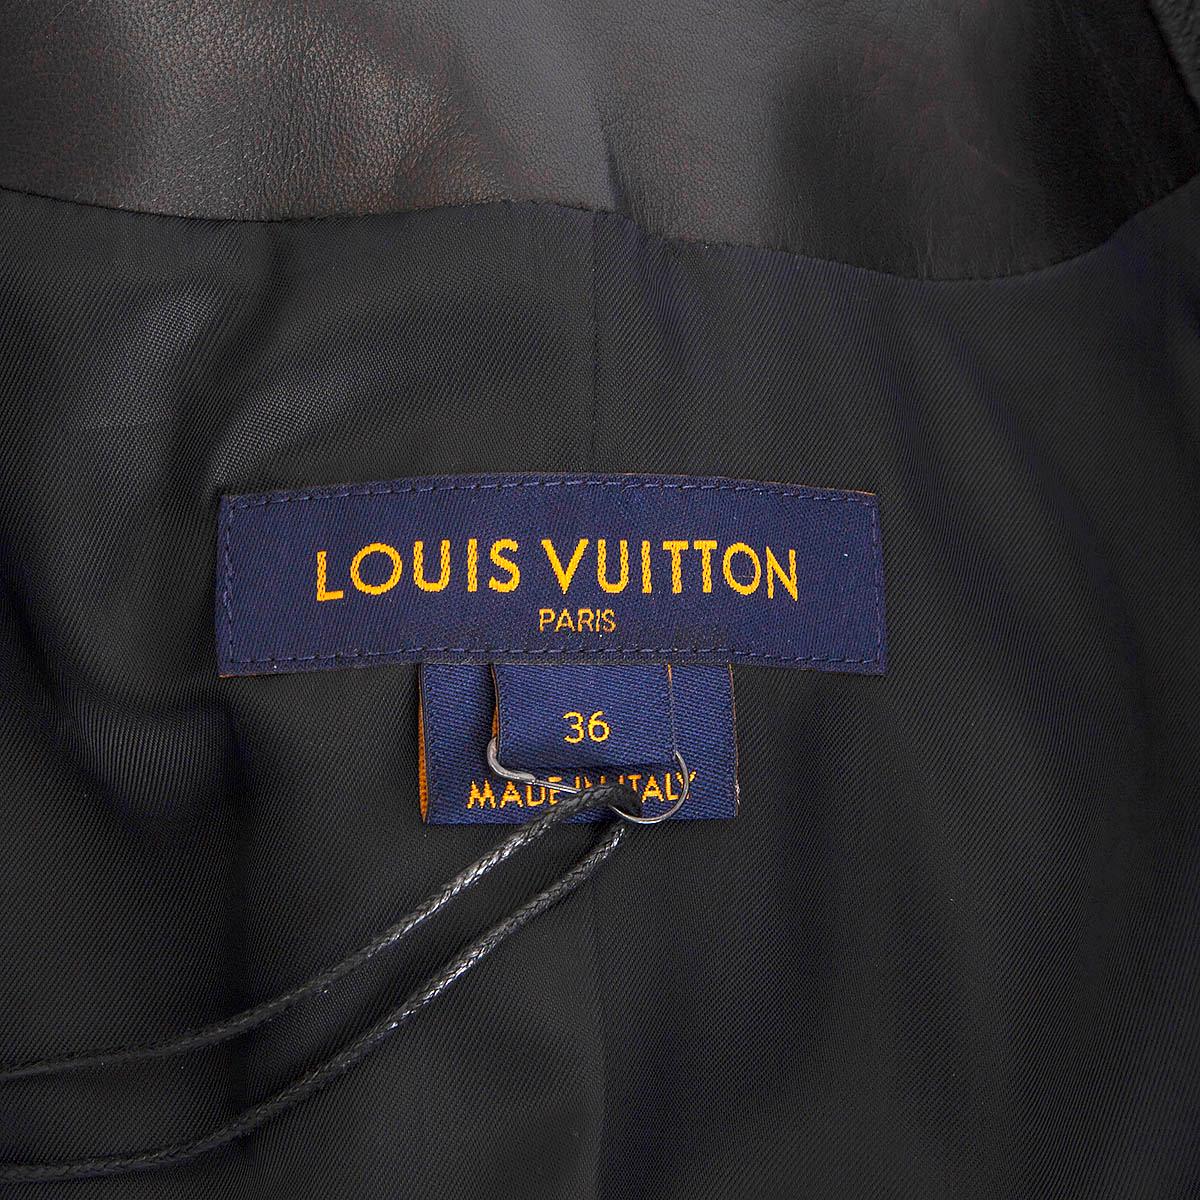 LOUIS VUITTON black leather SCALLOPED POCKETS Blazer Jacket 36 XS In Excellent Condition For Sale In Zürich, CH